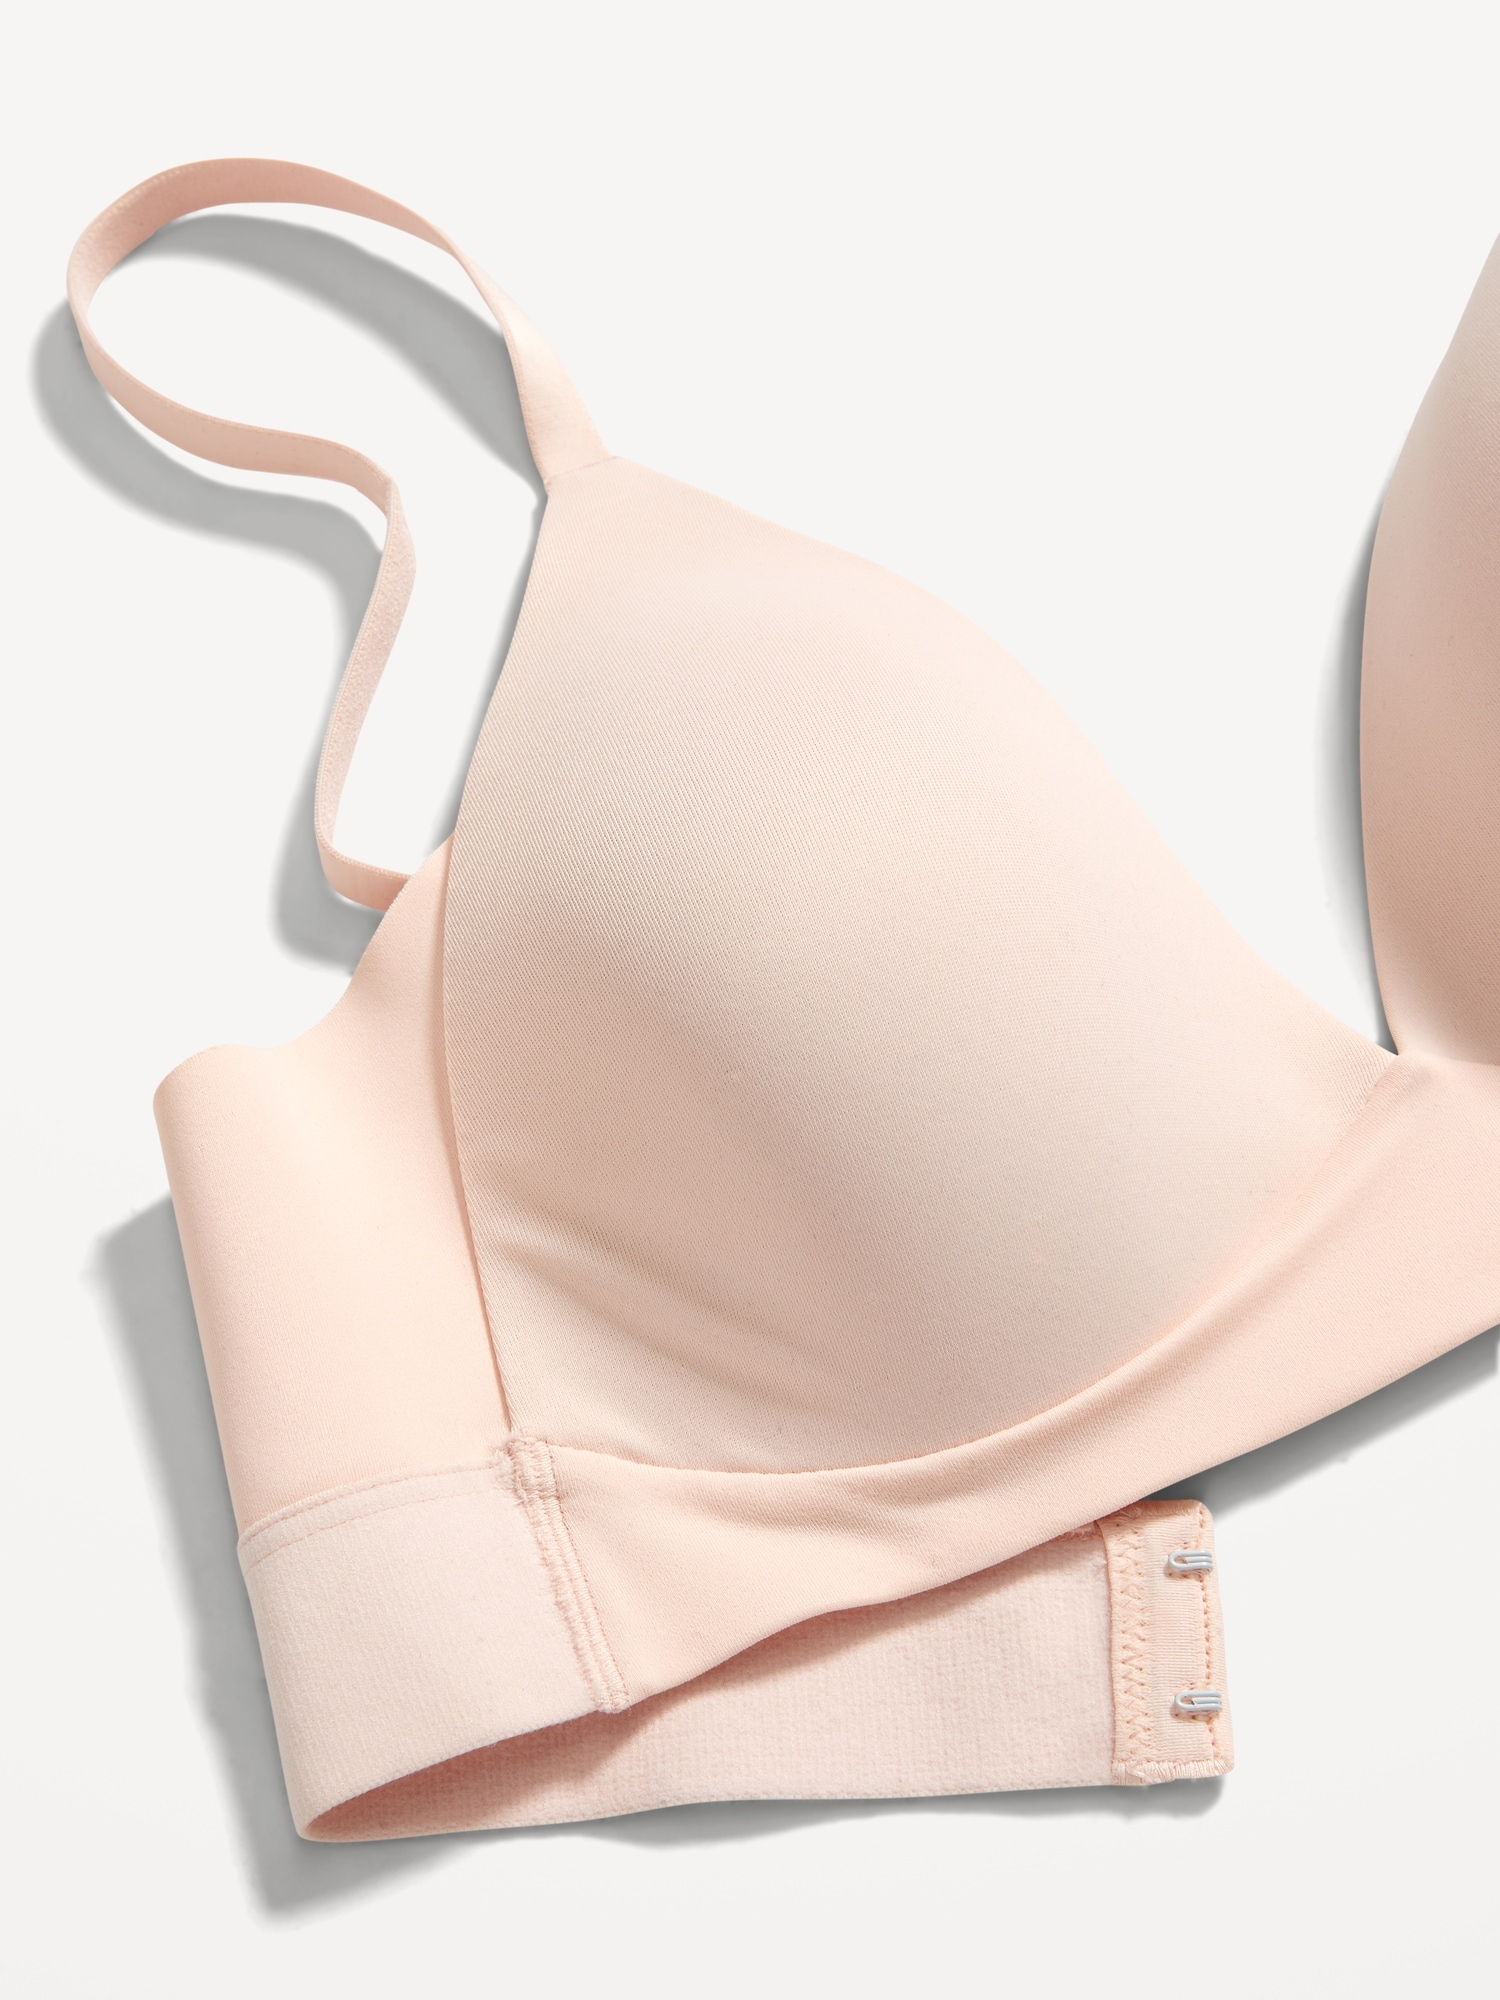 Looking For Bras Comparable to Aerie Sunnie Wireless Lightly Lined